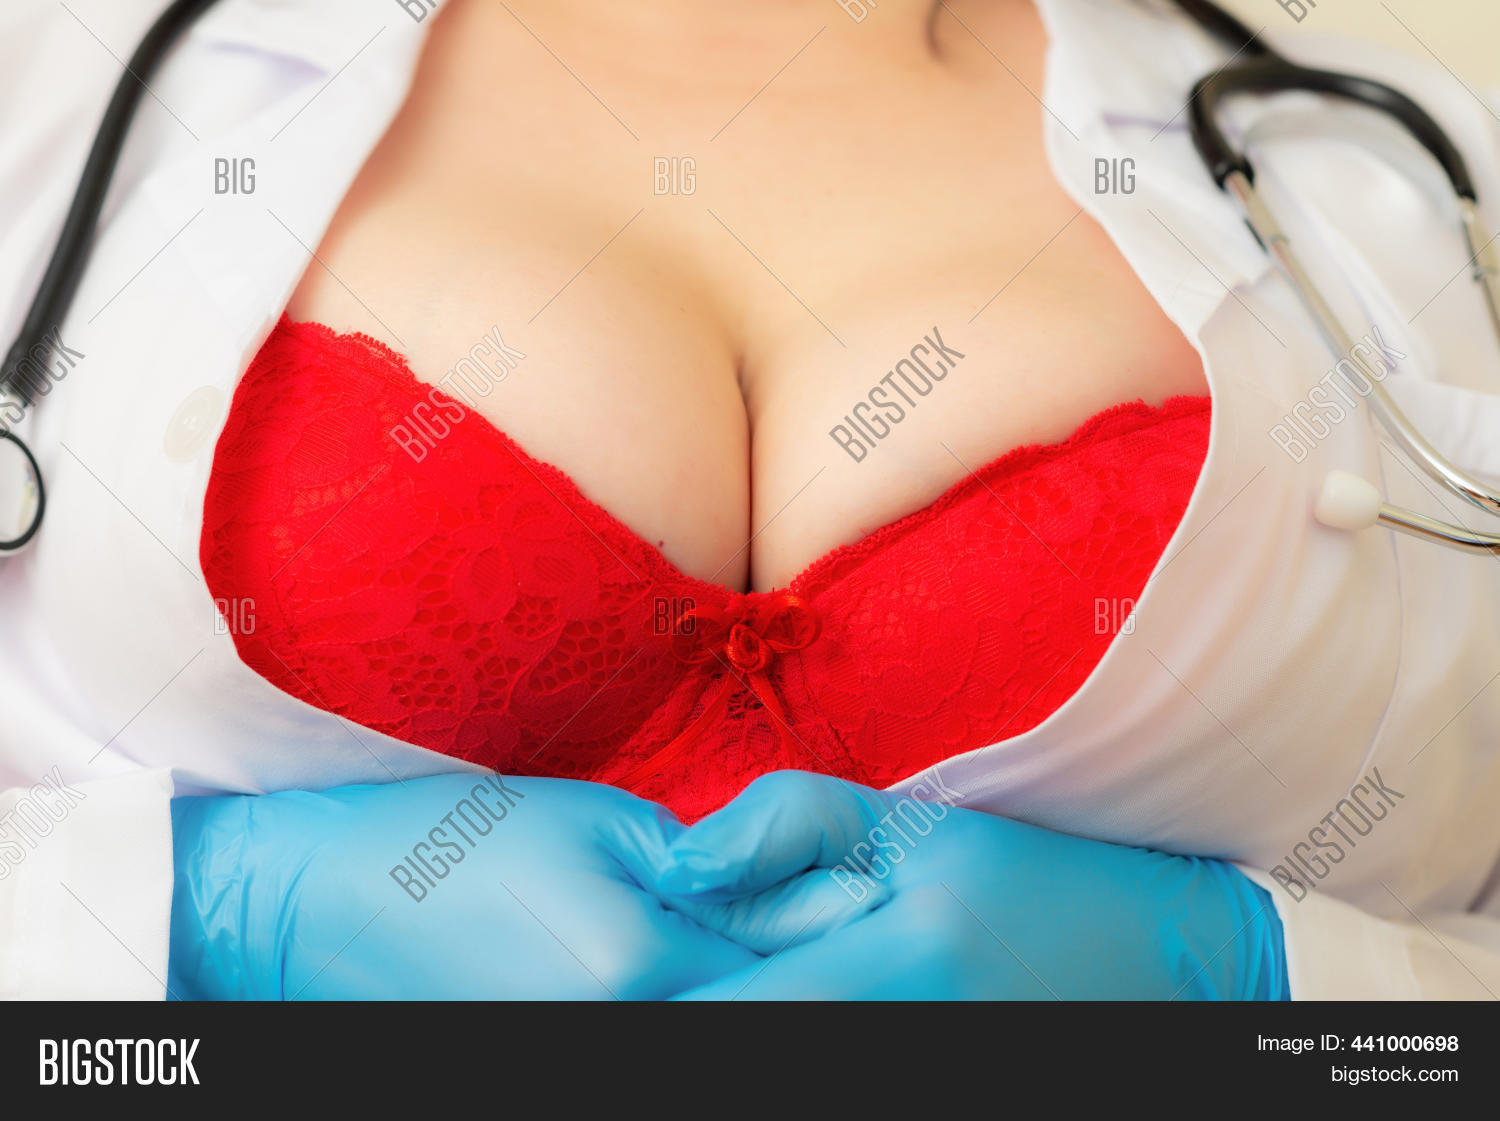 charles sorrells recommends hot nurses with big boobs pic